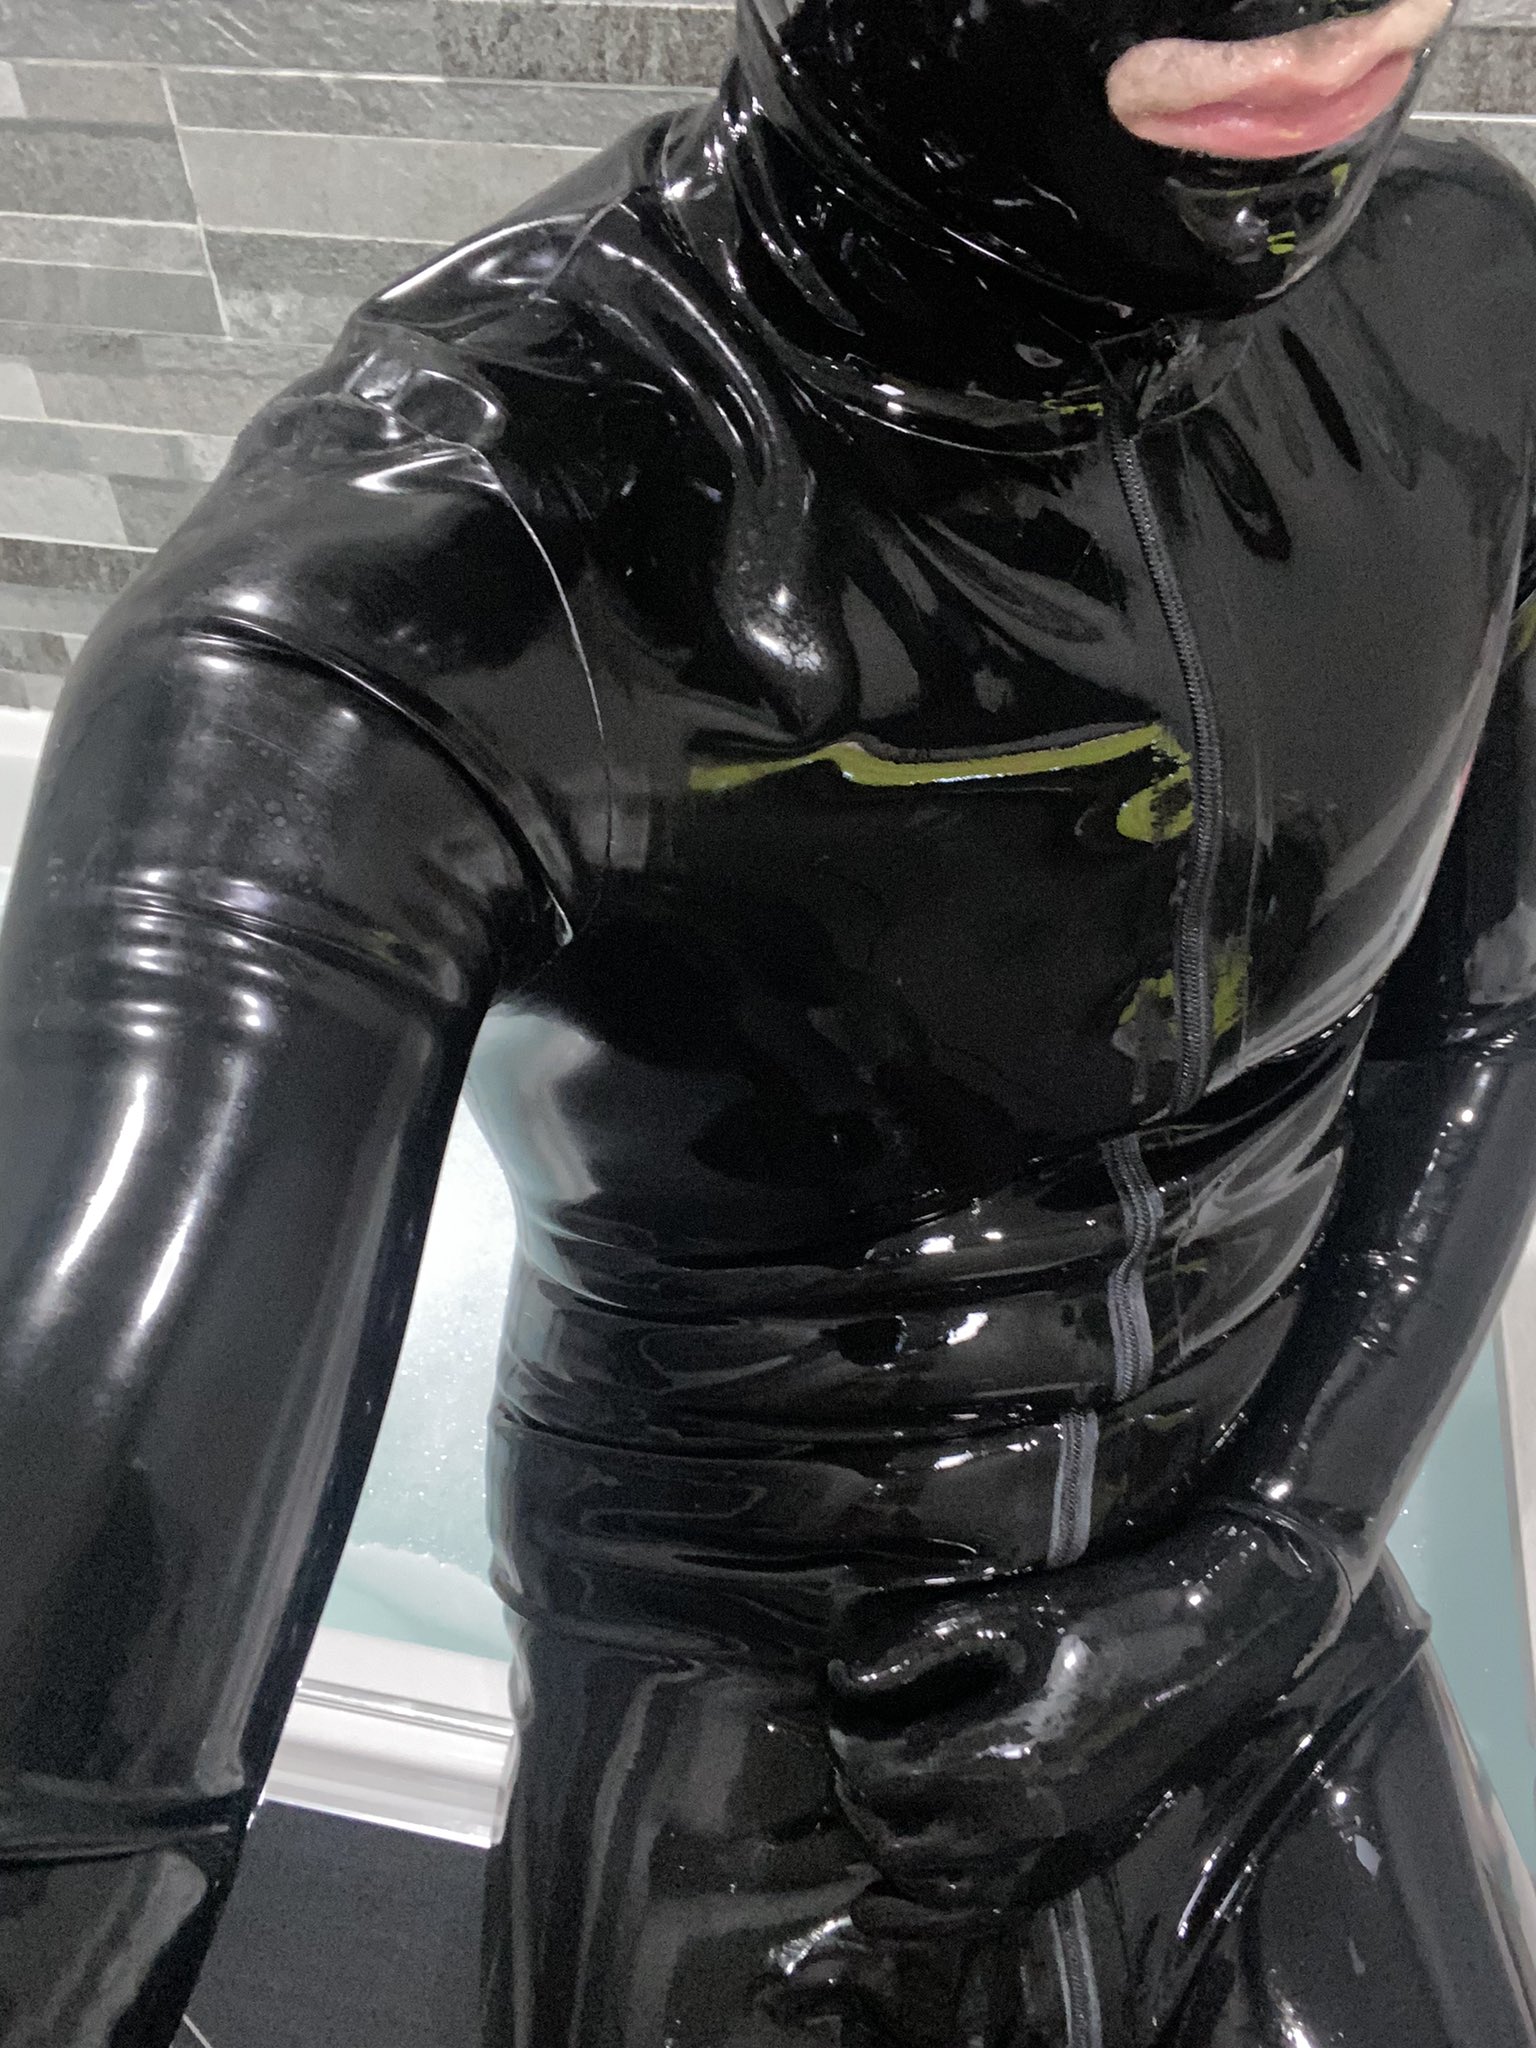 Rubberboy On Twitter Decided To Quickly Shine My Suit Before I Get In